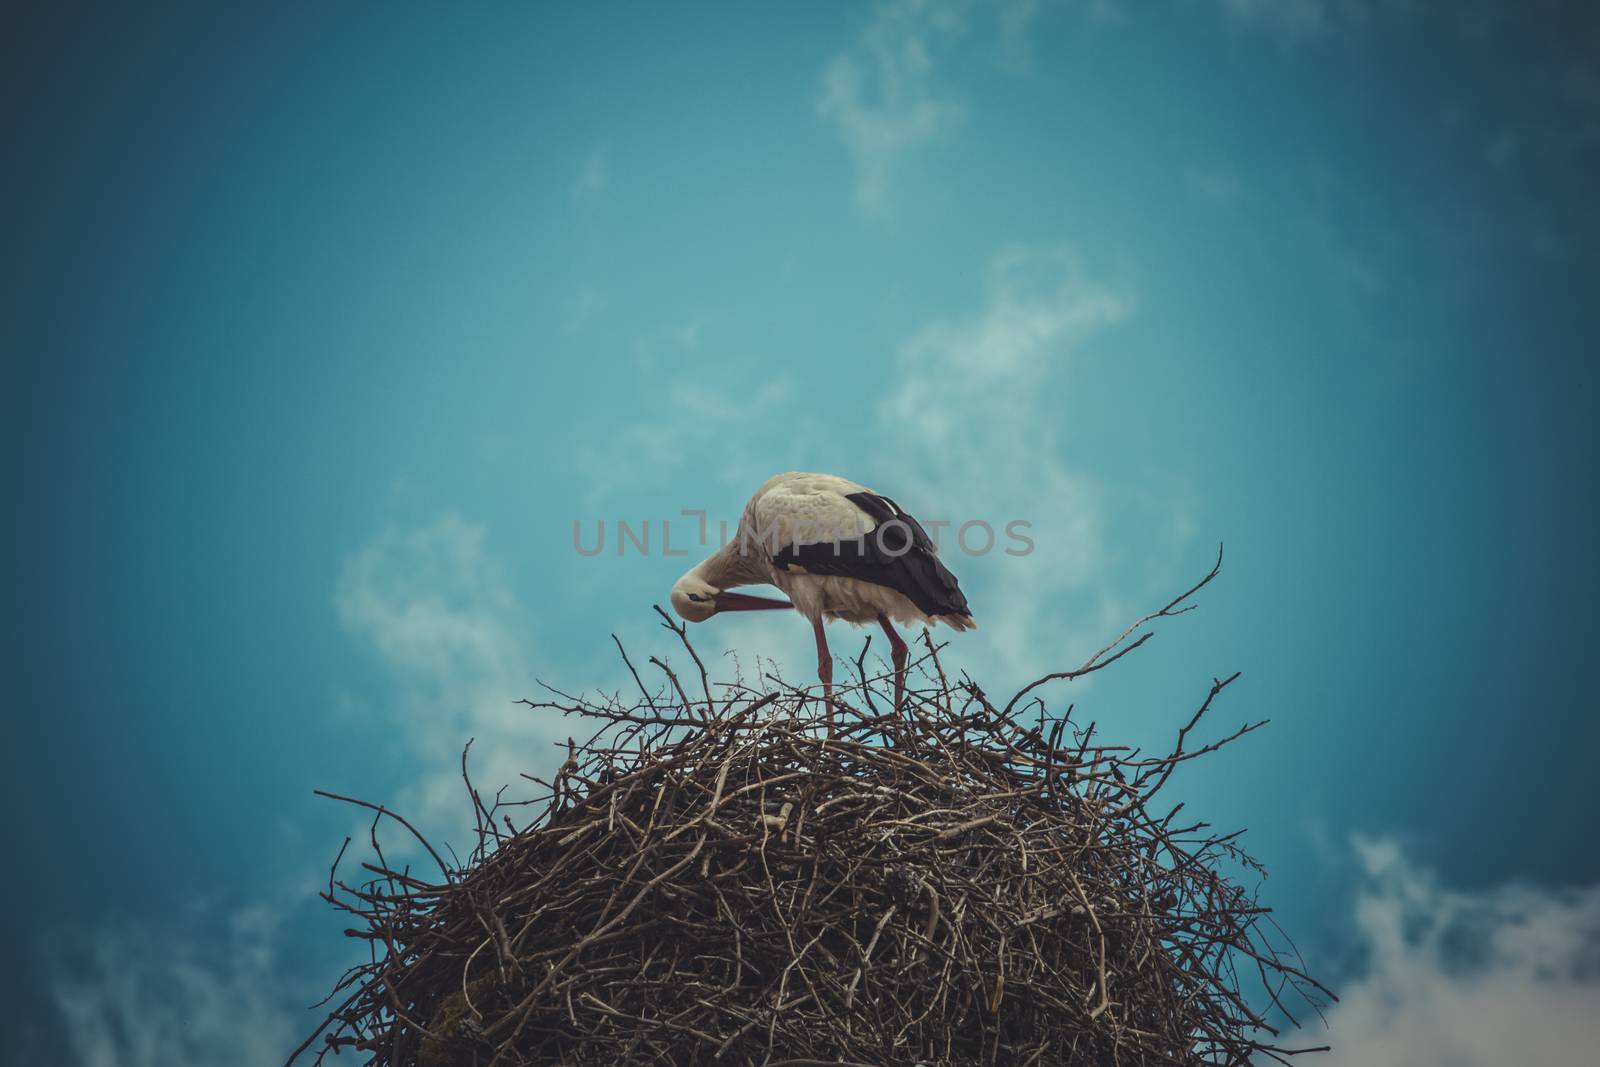 Nesting, Stork nest made ������of tree branches over blue sky in by FernandoCortes